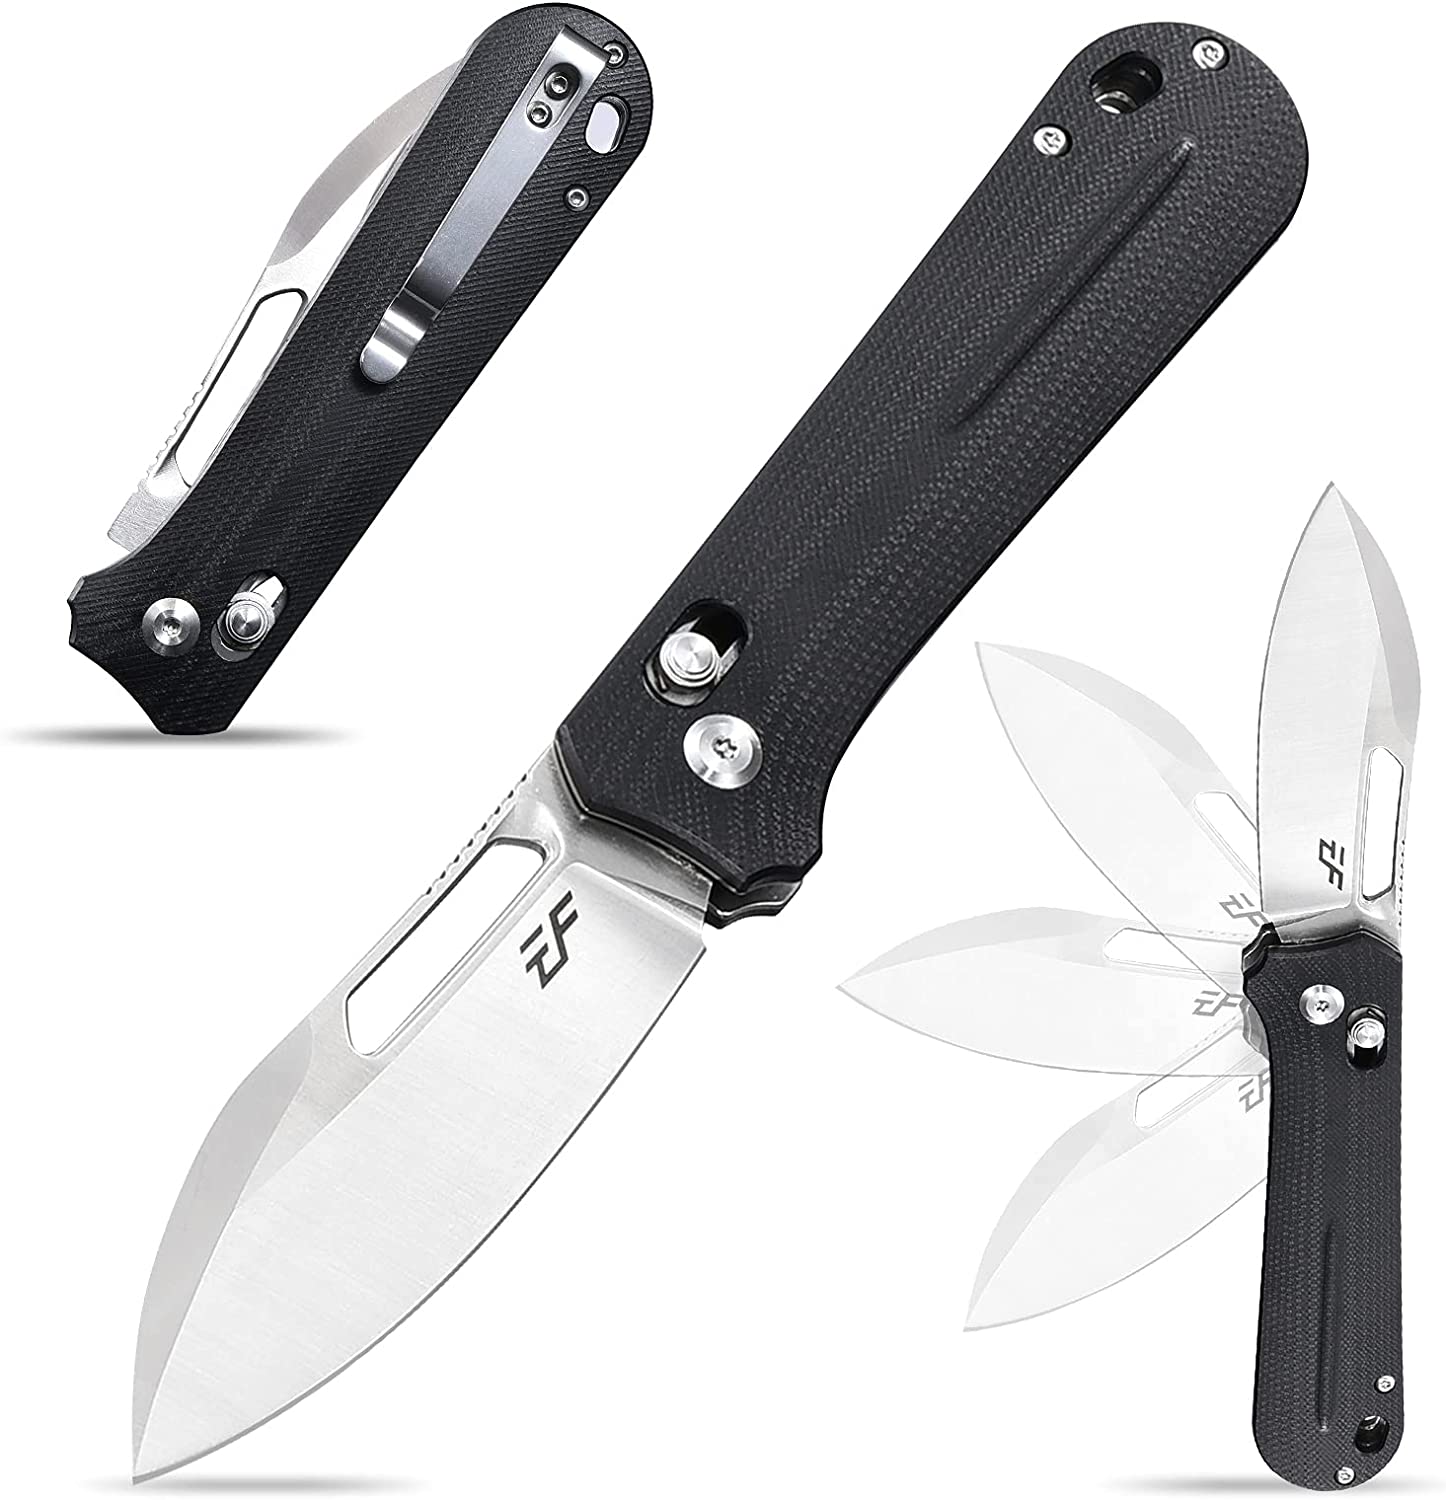 Eafengrow EF963 Folding Knife D2 Blade G10 Handle with Pocket Clip Axis Lock EDC Multitool Knives for Working Camping Outdoor (Black)